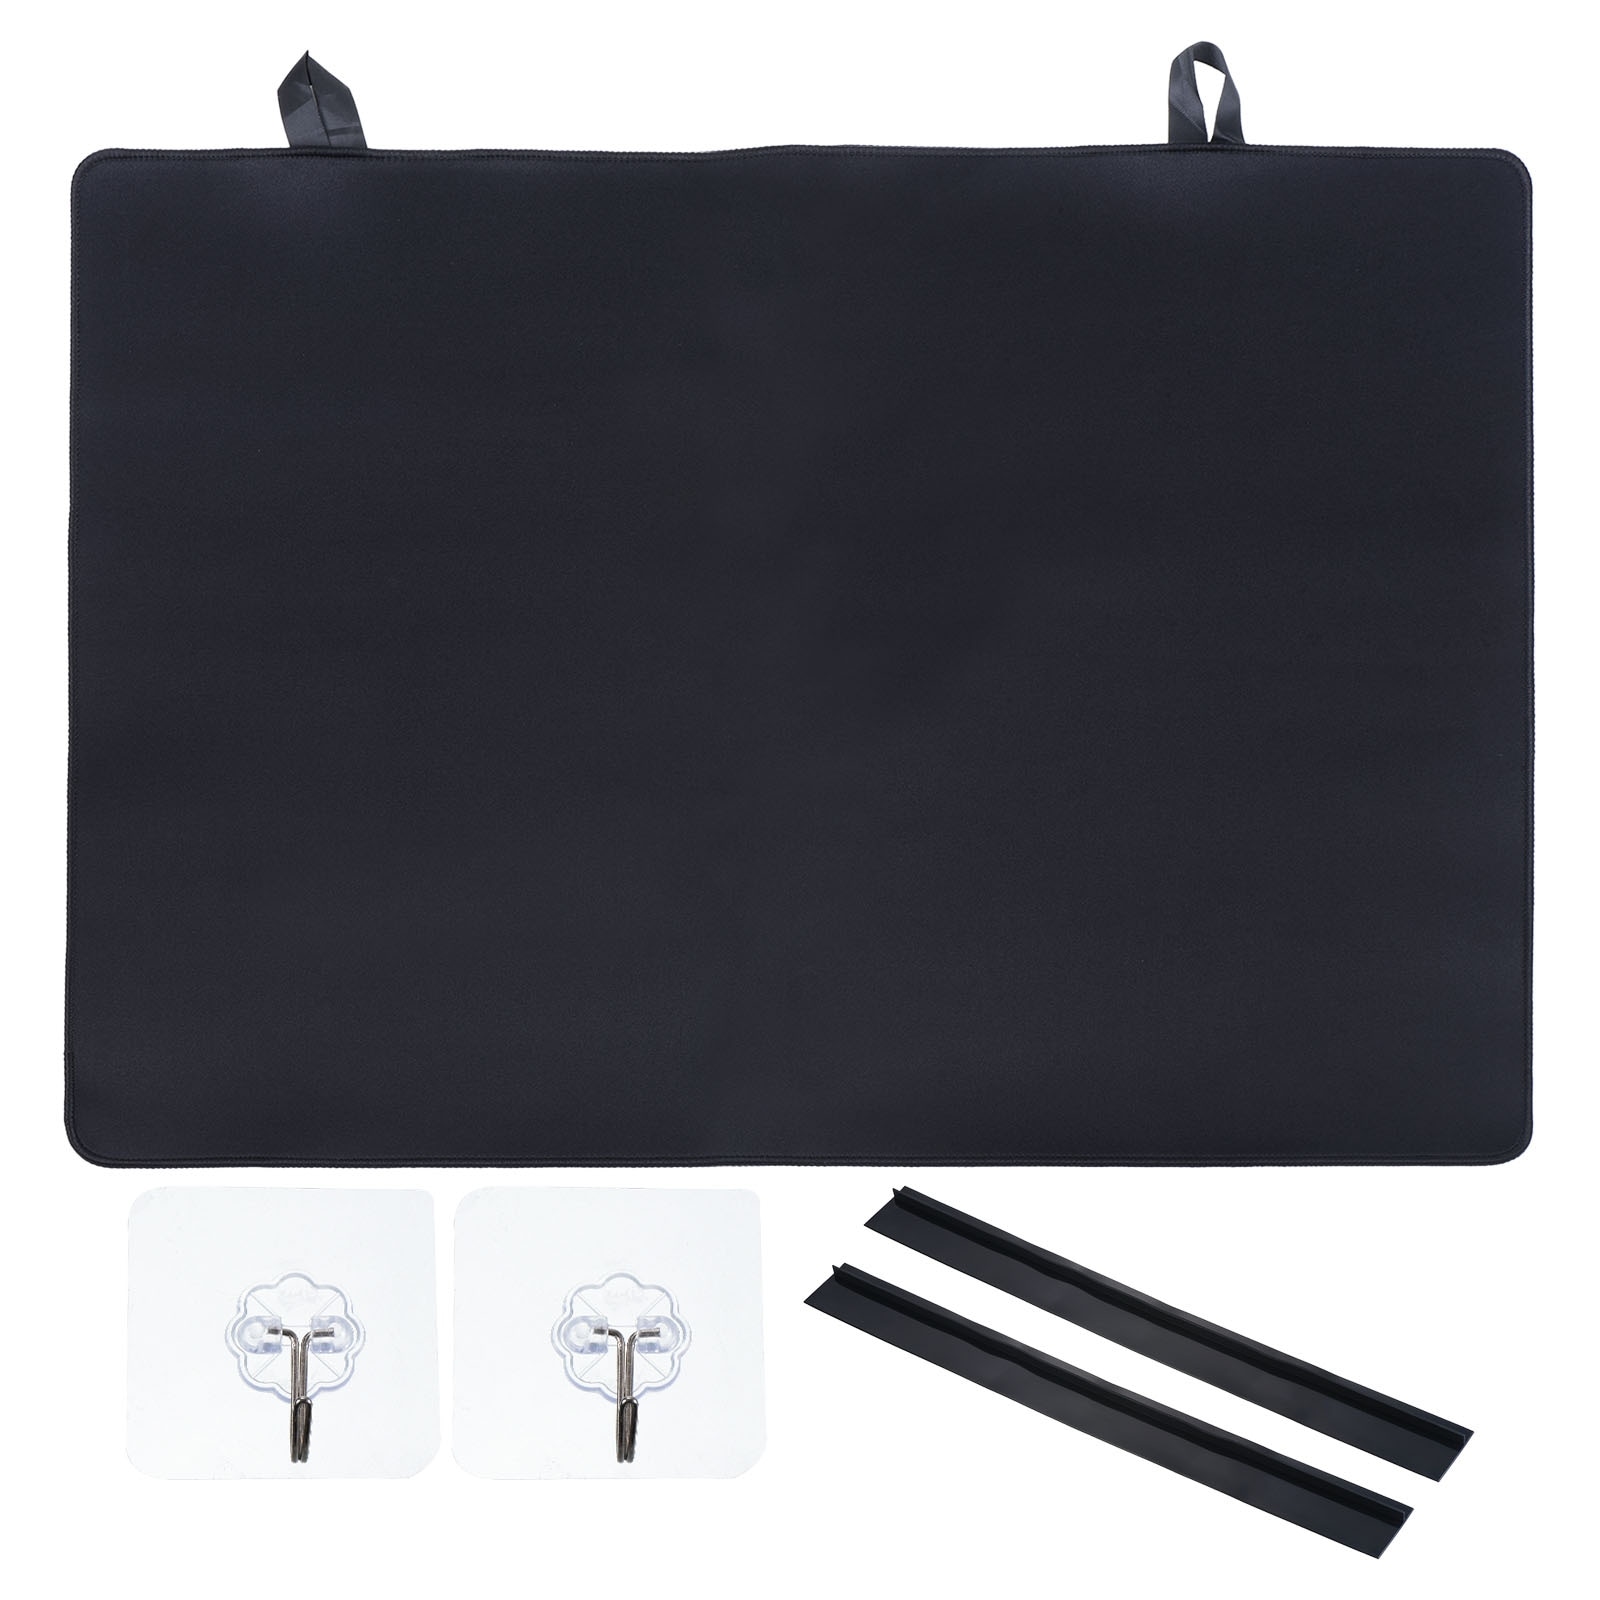 Stove Top Cover for Electric Stove, 24.2 x 20.8 Glass Stove Top Cover,  Black - On Sale - Bed Bath & Beyond - 38150819